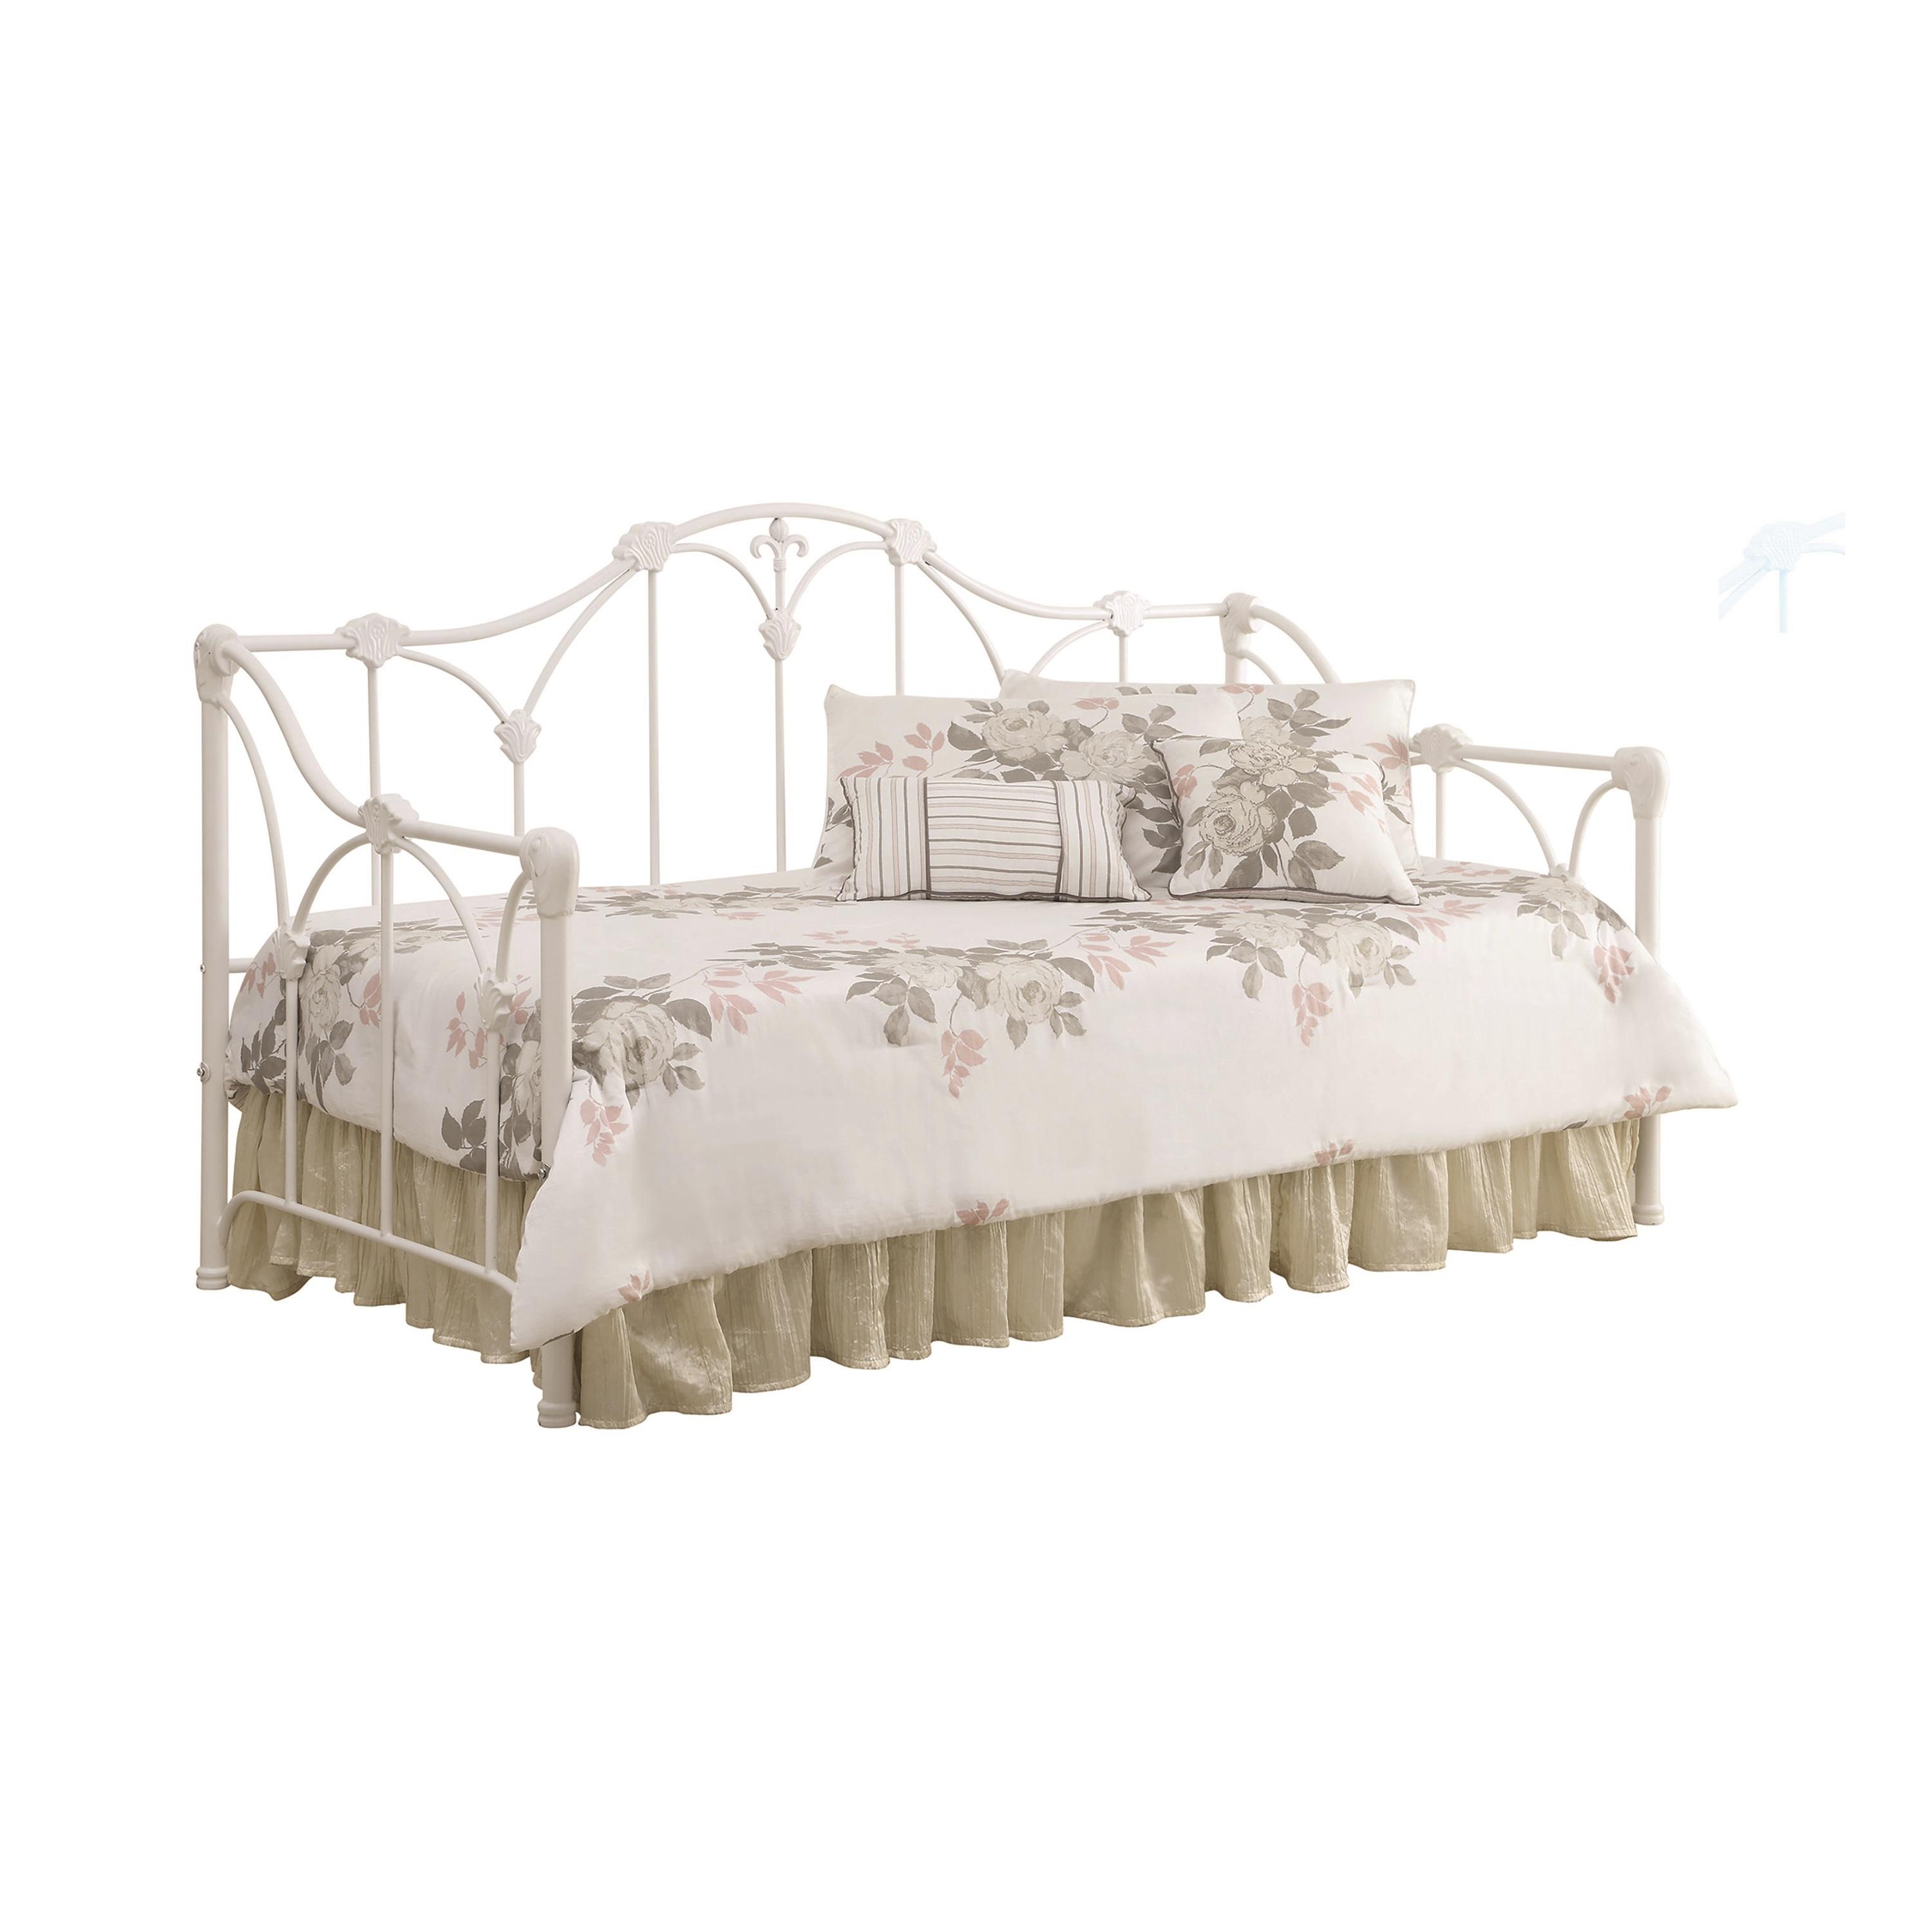 Transitional Daybed 300216 300216 in White 